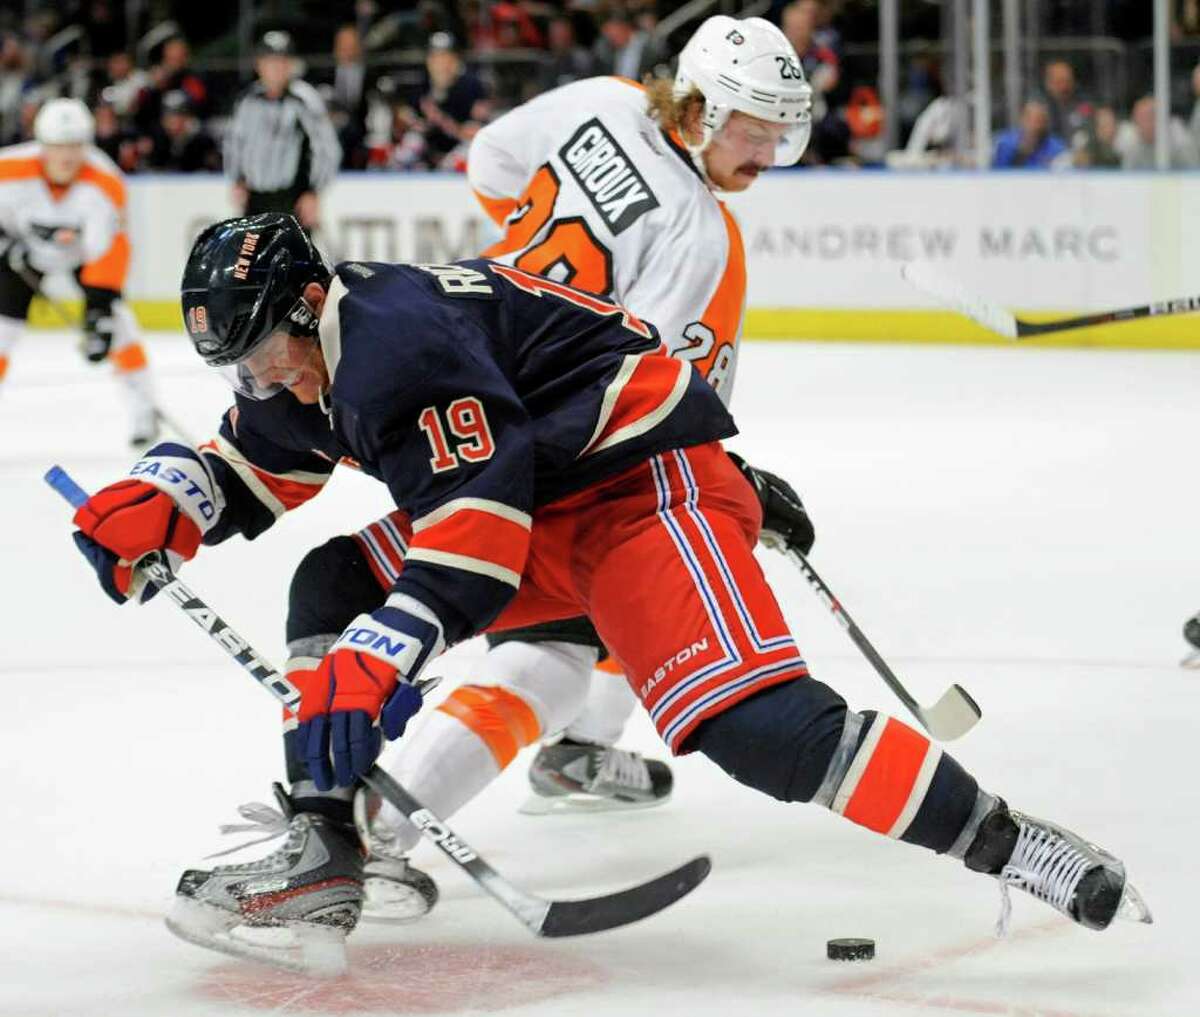 New York Rangers' Brad Richards (19) battles for the puck with Philadelphia Flyers' Claude Giroux during the third period of an NHL hockey game, Saturday, Nov. 26, 2011 at Madison Square Garden in New York. The Rangers won 2-0. (AP Photo/Bill Kostroun)